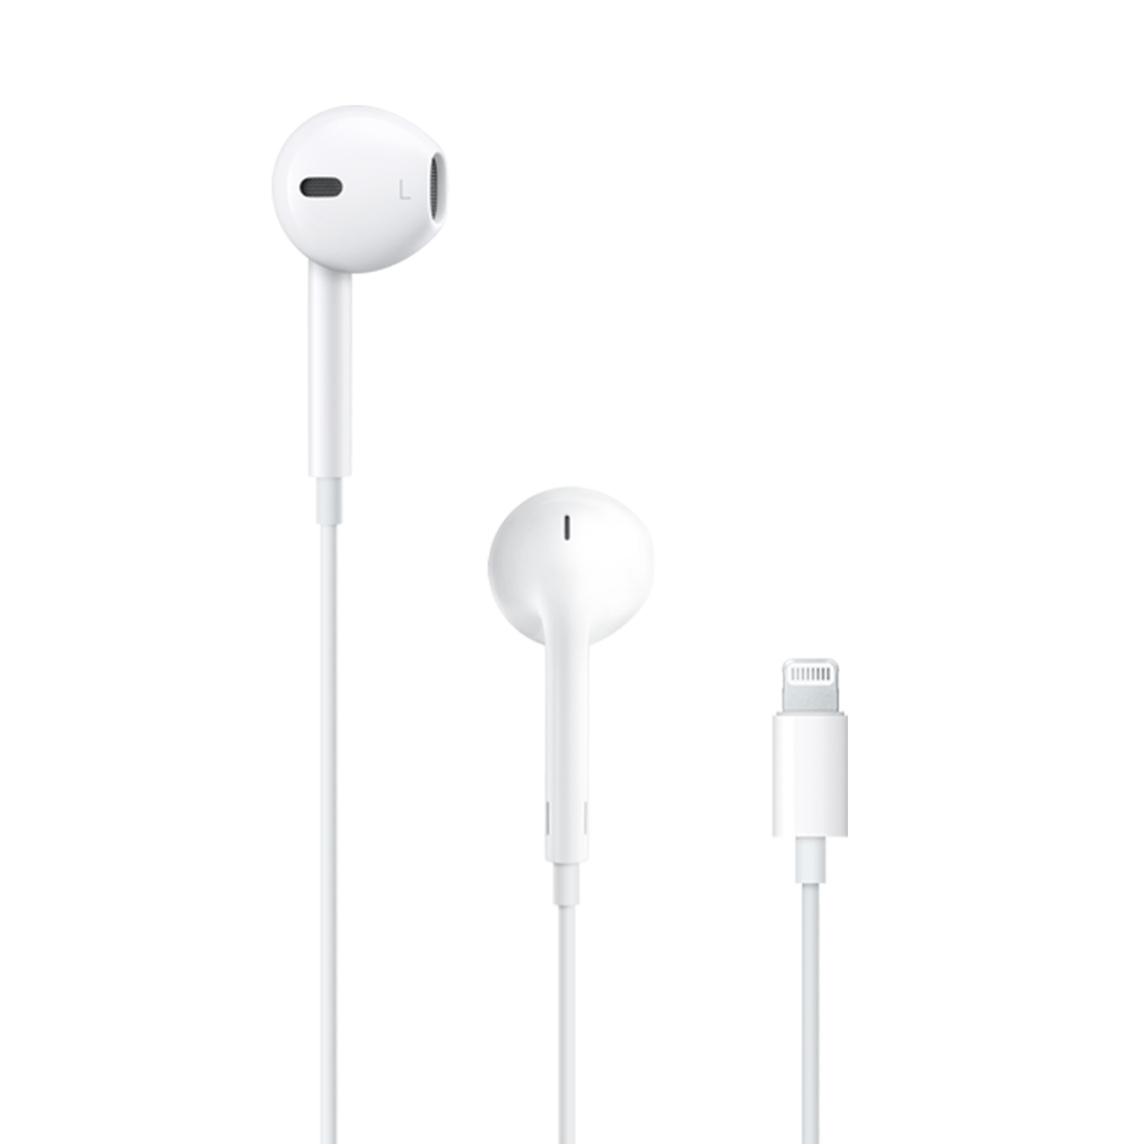 Side, rear, and plug of EarPods with Lightning Connector.